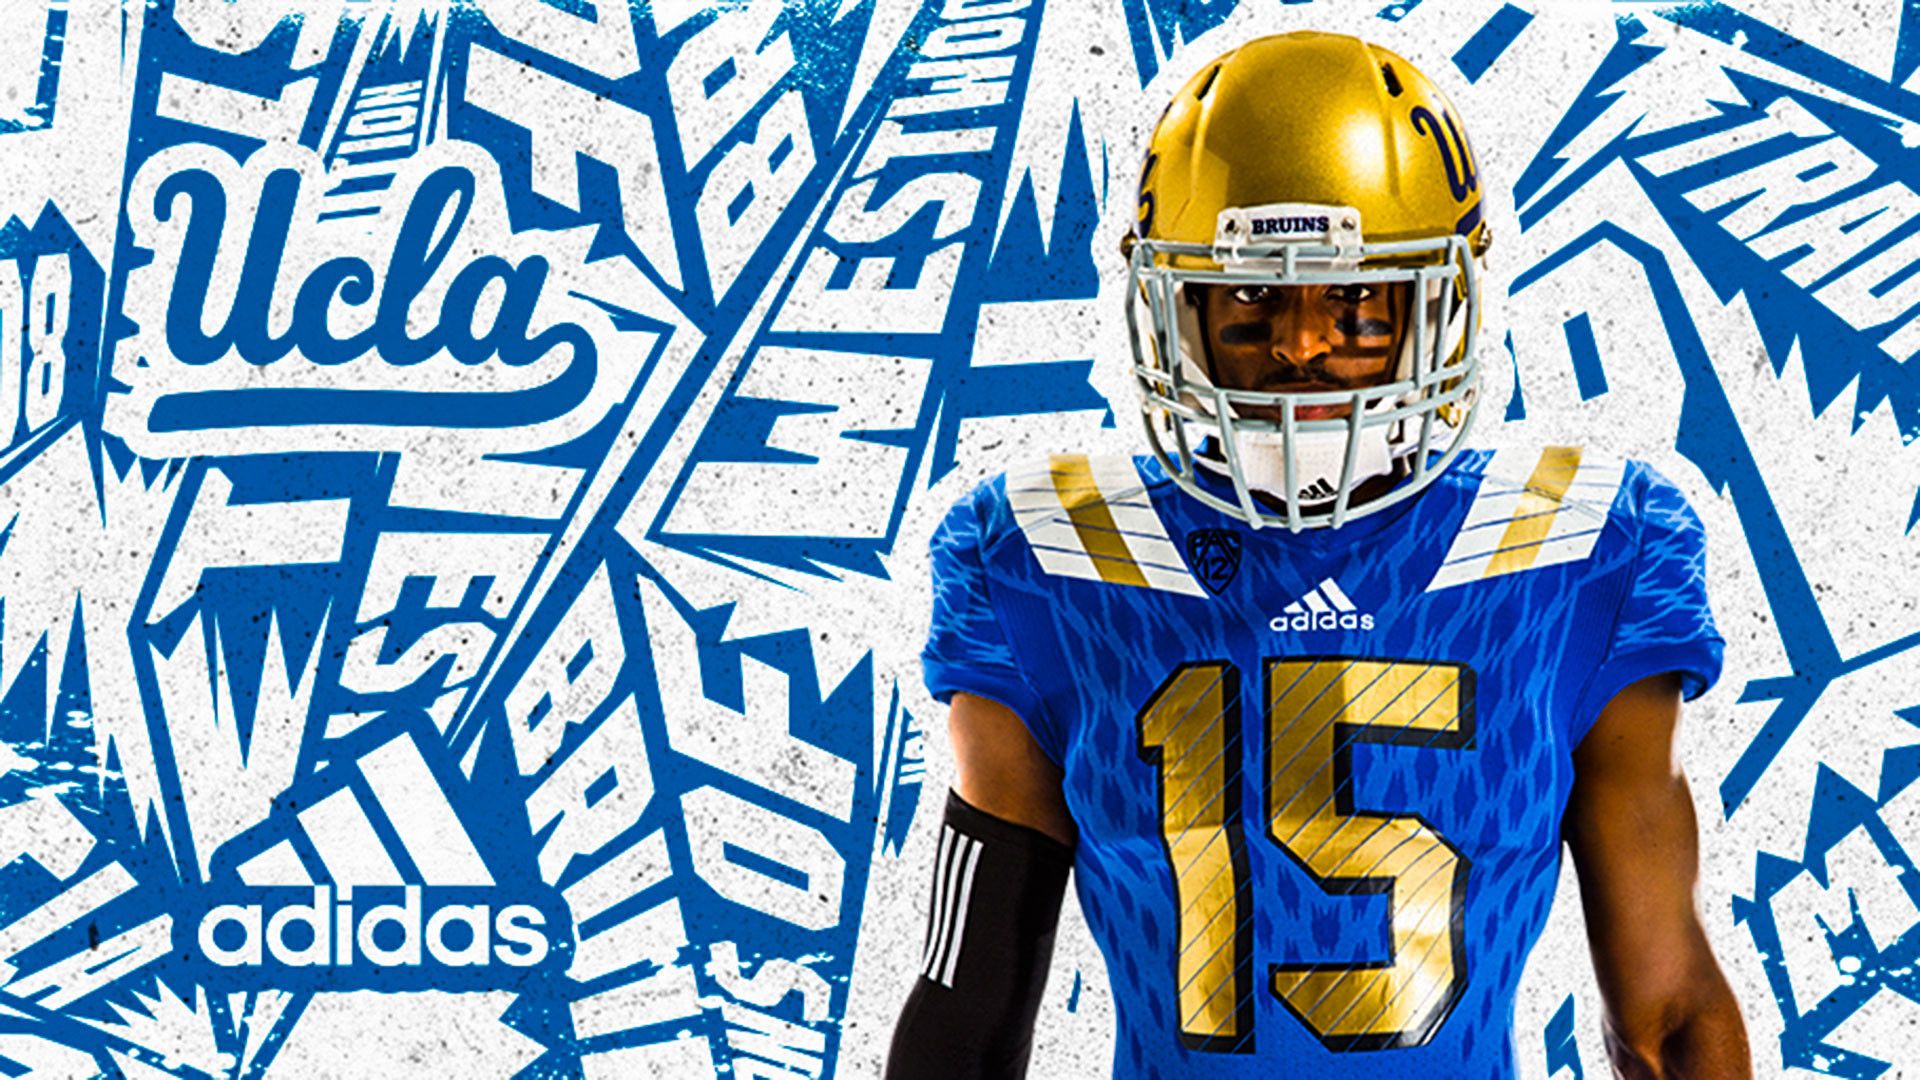 Download wallpapers UCLA Bruinss flag NCAA yellow blue metal background  american football team UCLA Bruins logo USA american football golden  logo UCLA Bruins for desktop free Pictures for desktop free